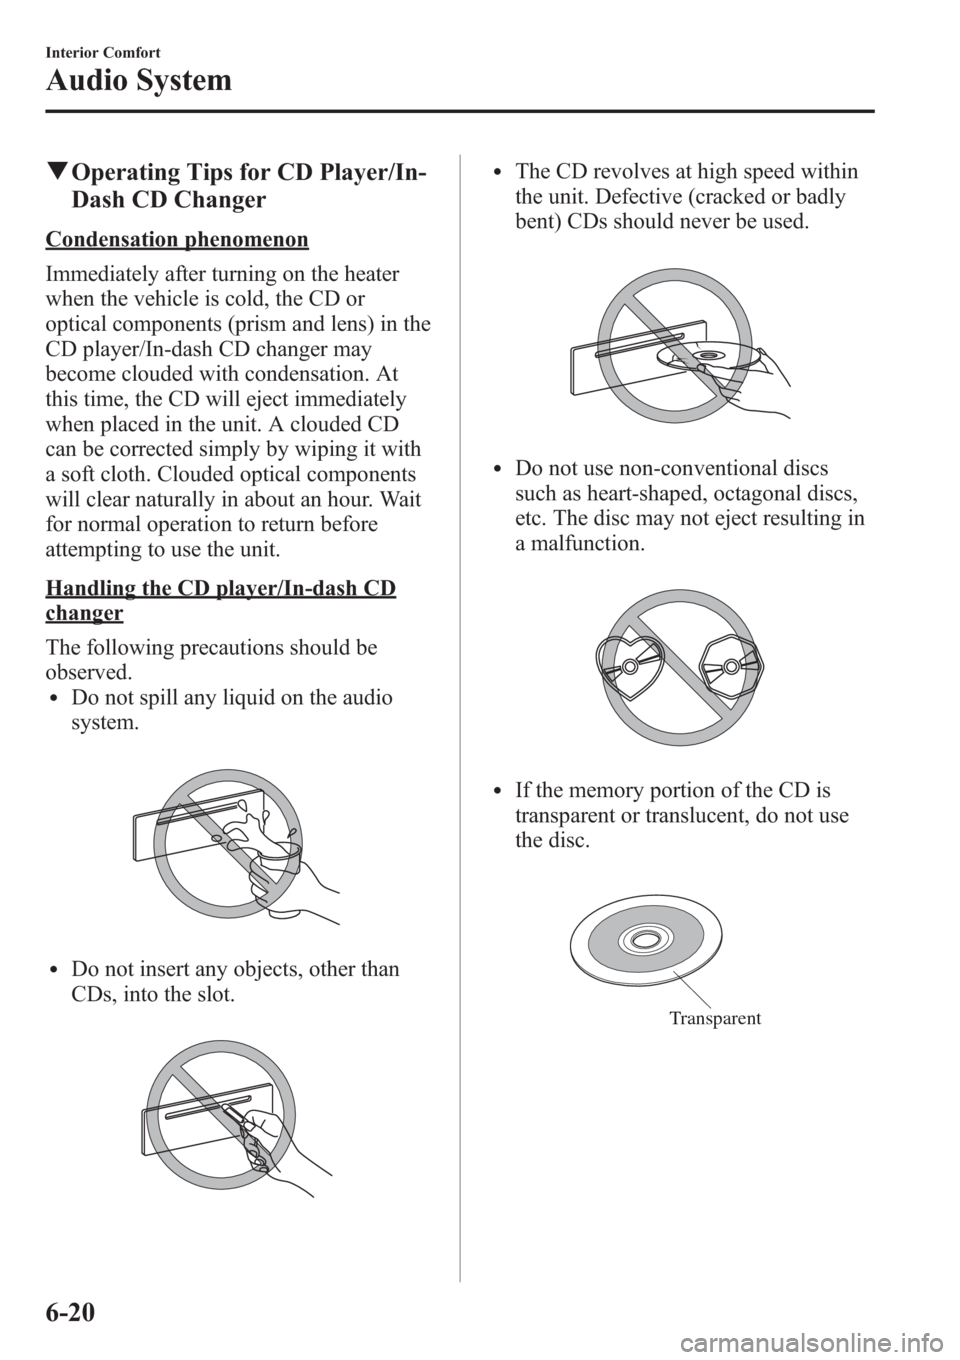 MAZDA MODEL 3 HATCHBACK 2013  Owners Manual (in English) qOperating Tips for CD Player/In-
Dash CD Changer
Condensation phenomenon
Immediately after turning on the heater
when the vehicle is cold, the CD or
optical components (prism and lens) in the
CD play